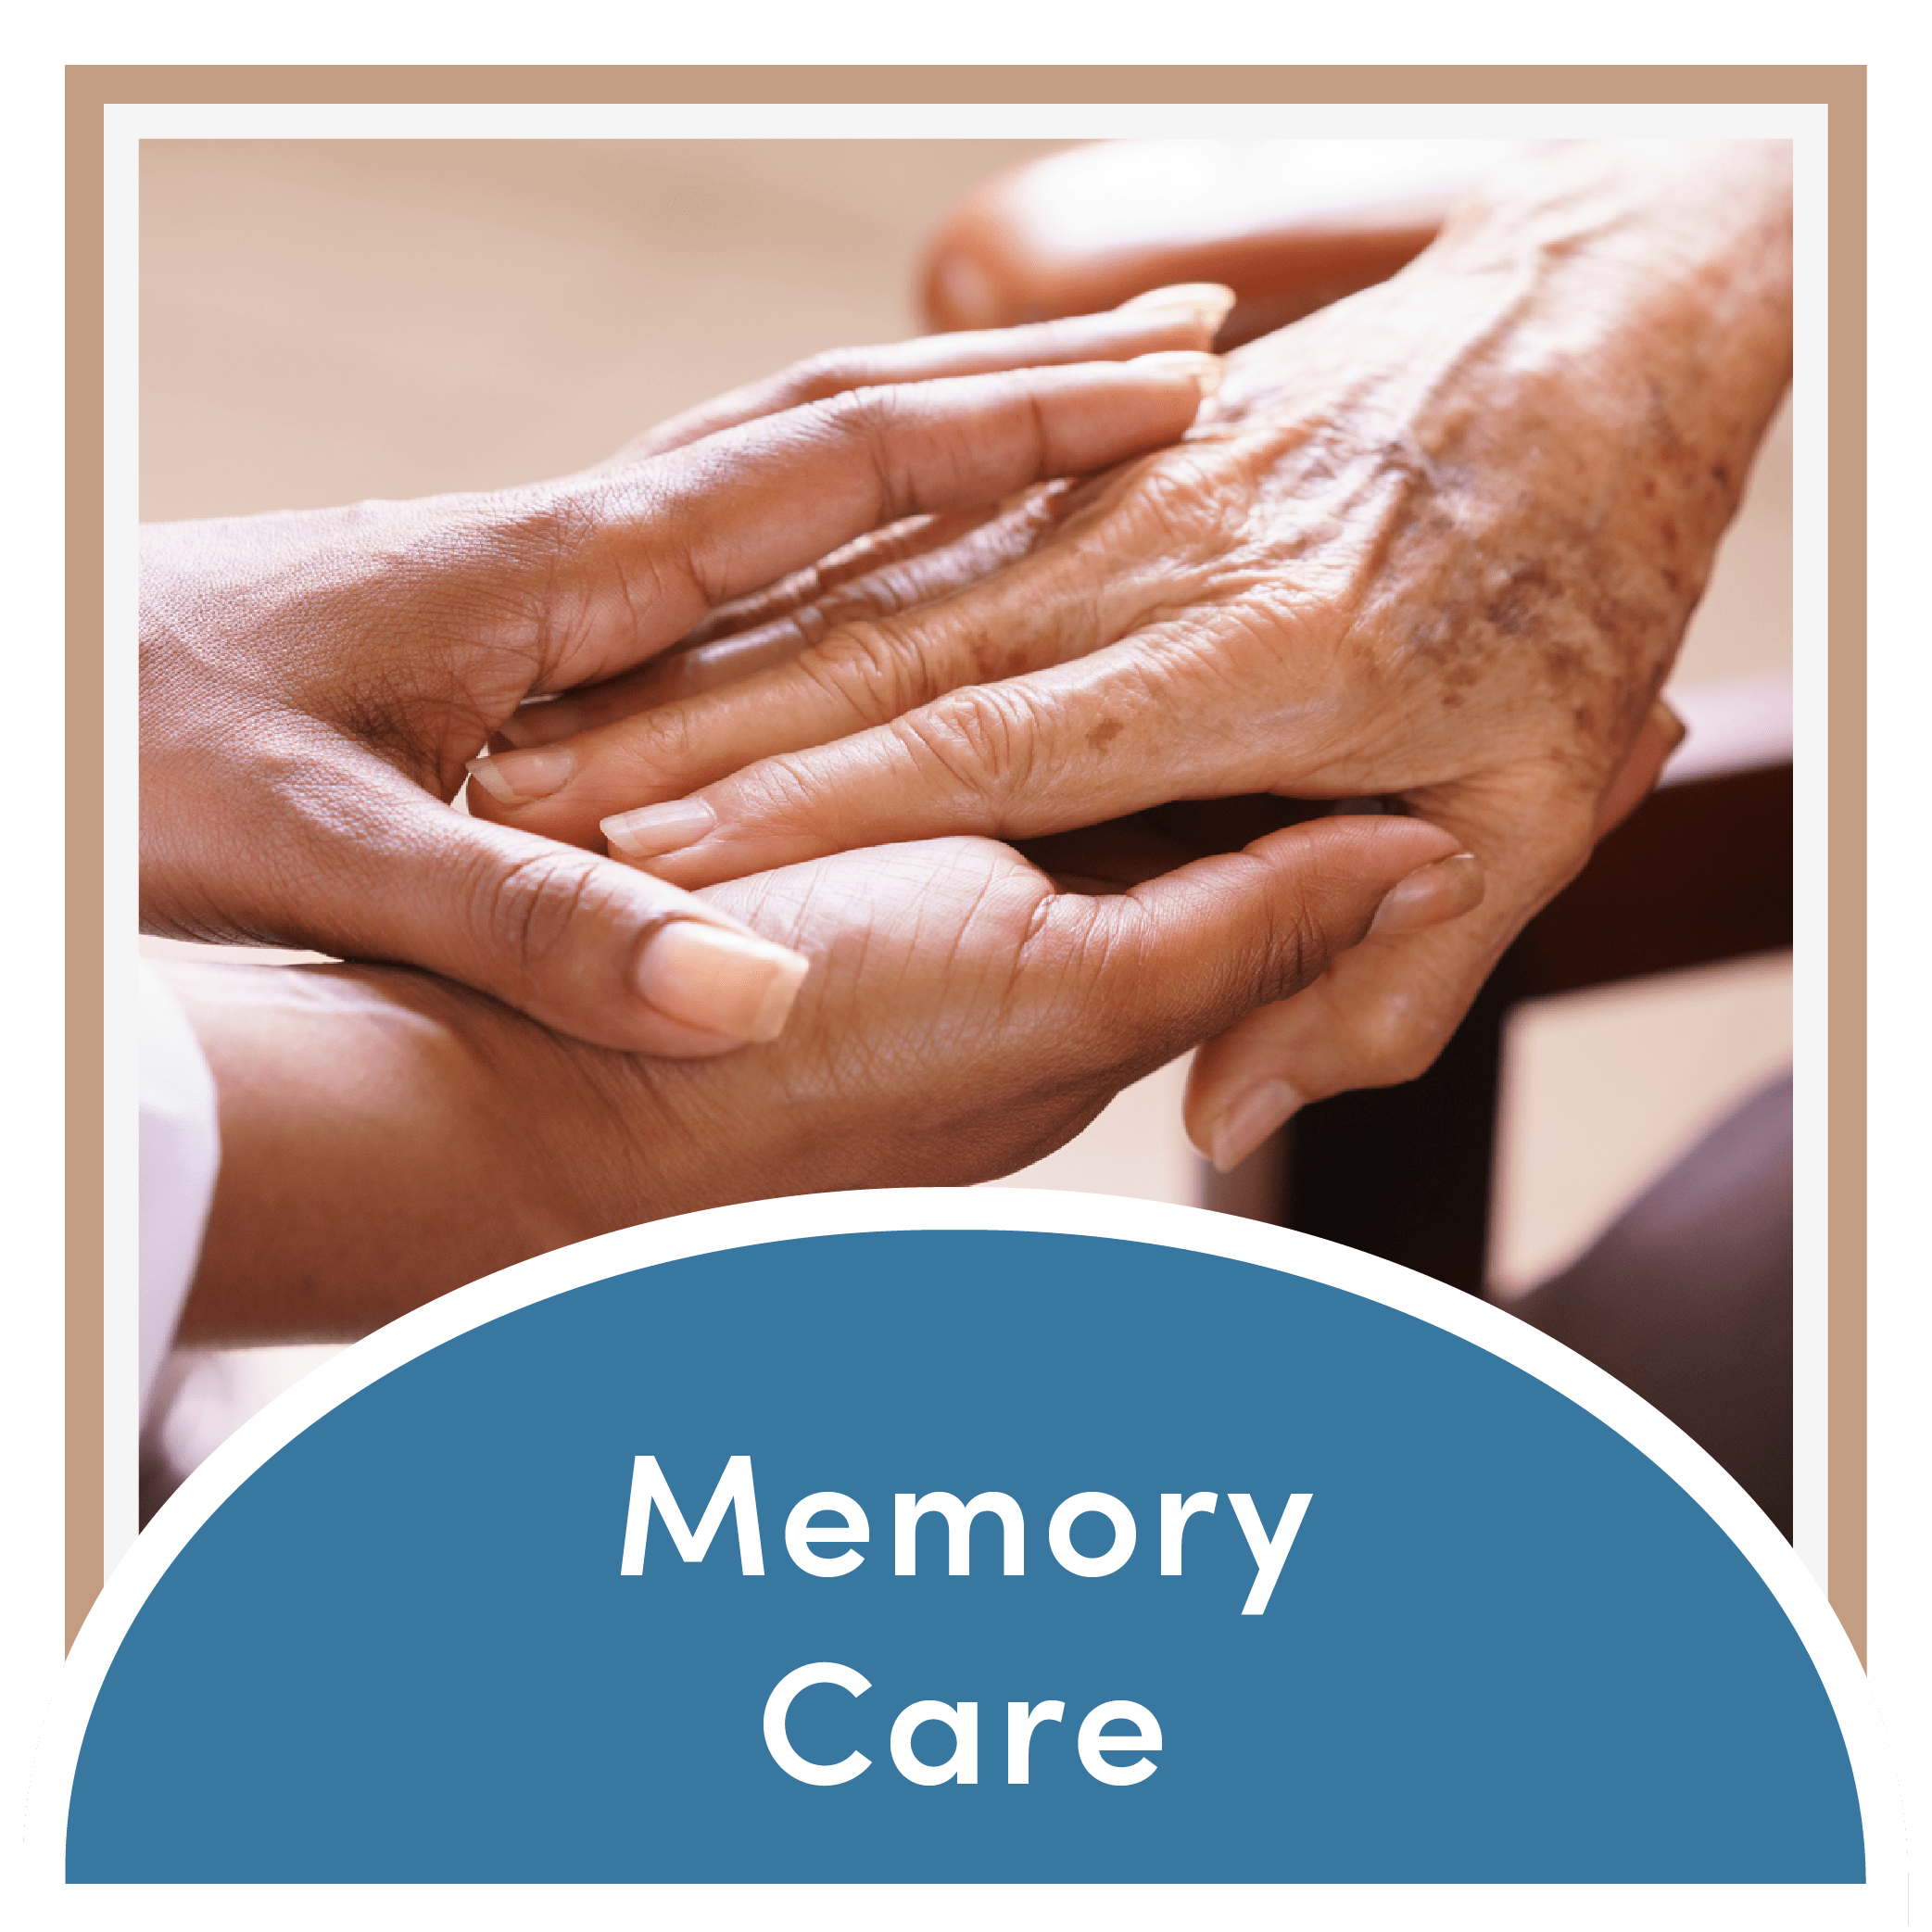 Link to the memory care page of Wisteria Place Retirement Living in Abilene, Texas